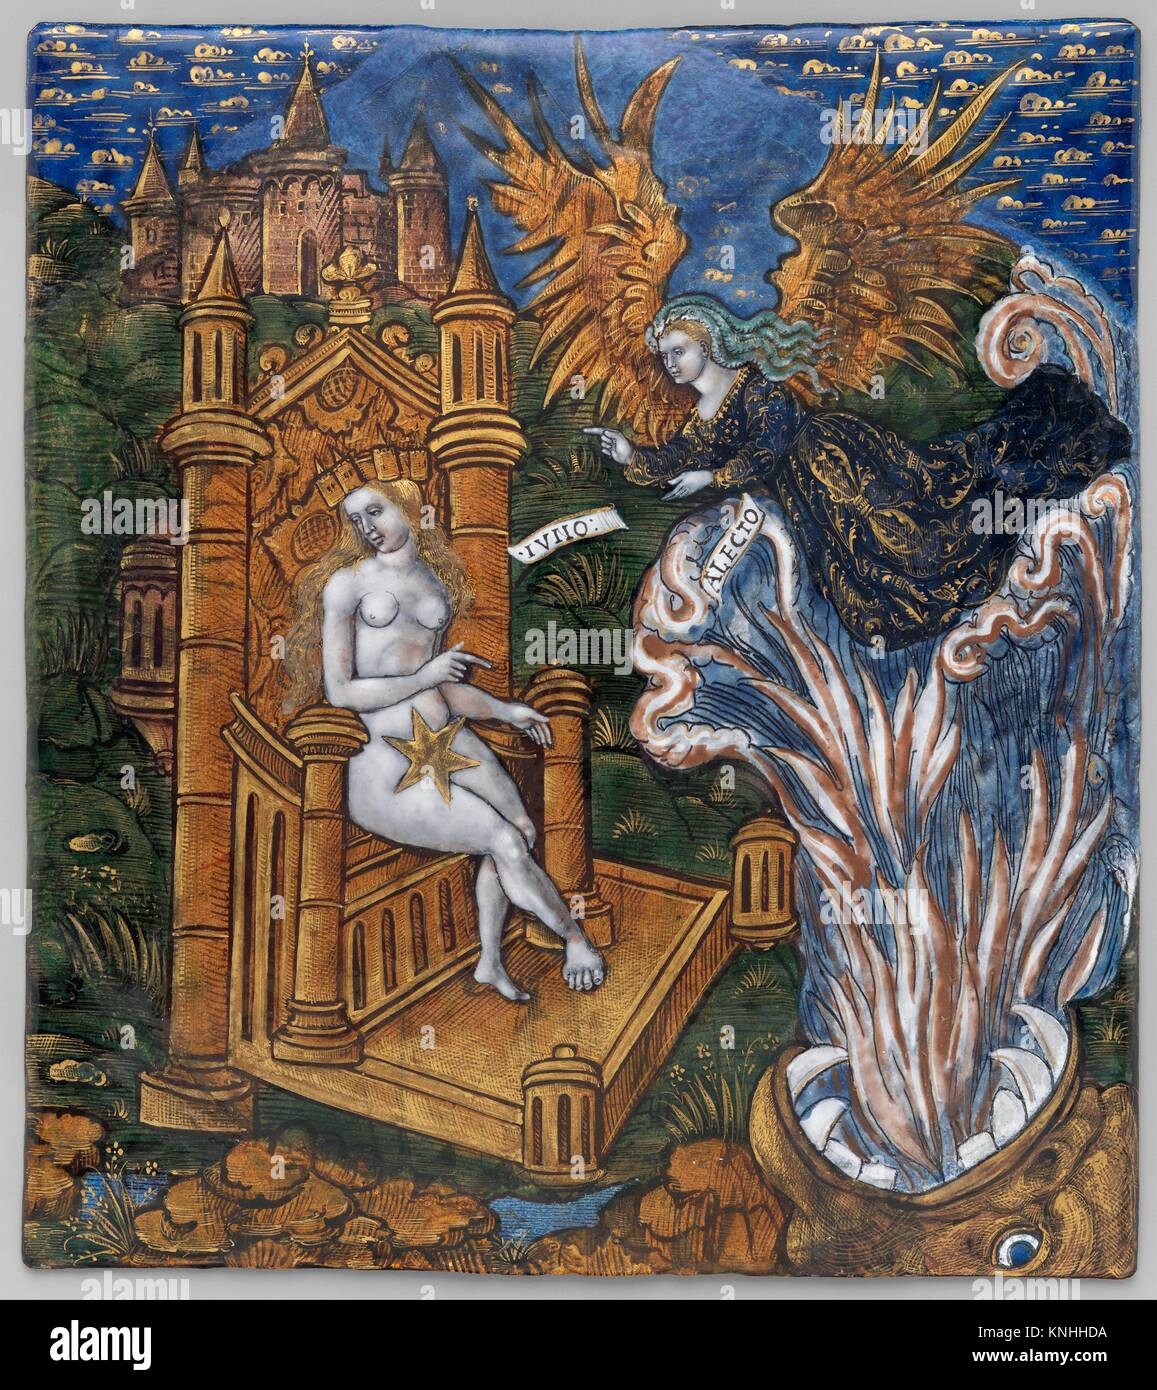 Juno, Seated on a Golden Throne, Asks Alecto to Confuse the Trojans (Aeneid, Book VI). Artist: Master of the Aeneid (active ca. 1530-40); Date: ca. Stock Photo